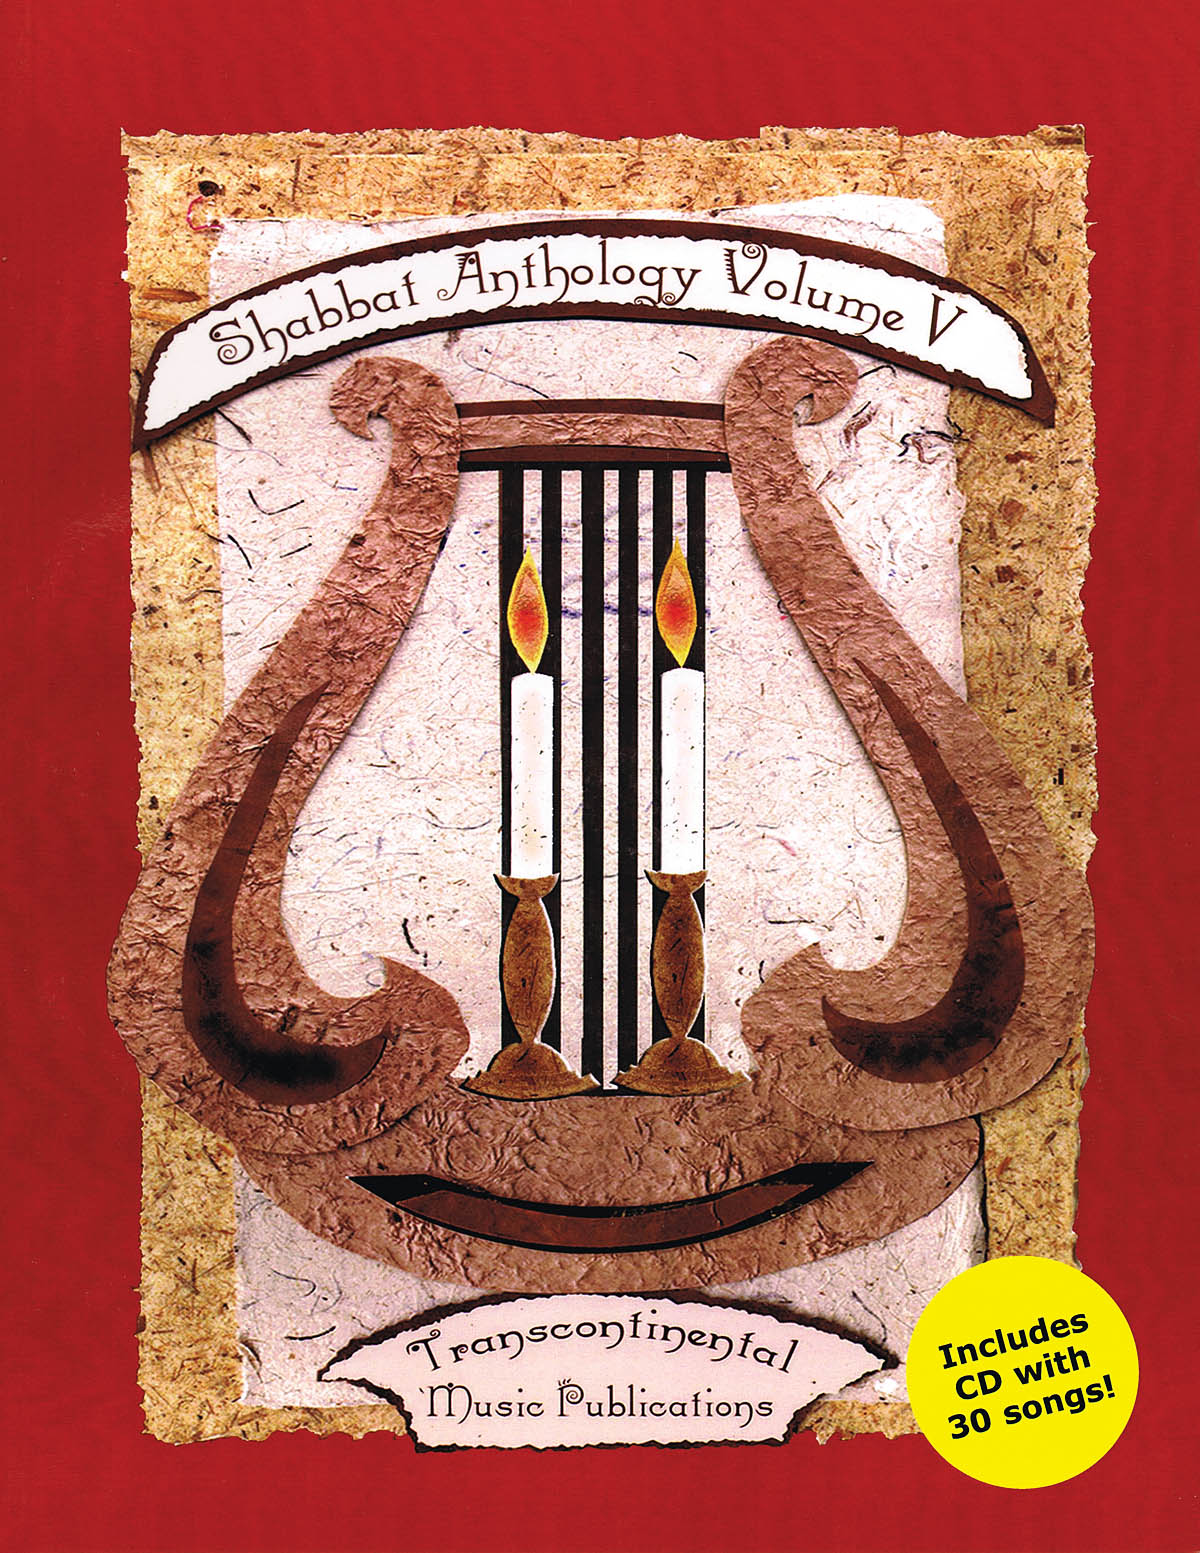 Shabbat Anthology Vol. V: Piano  Vocal and Guitar: Mixed Songbook